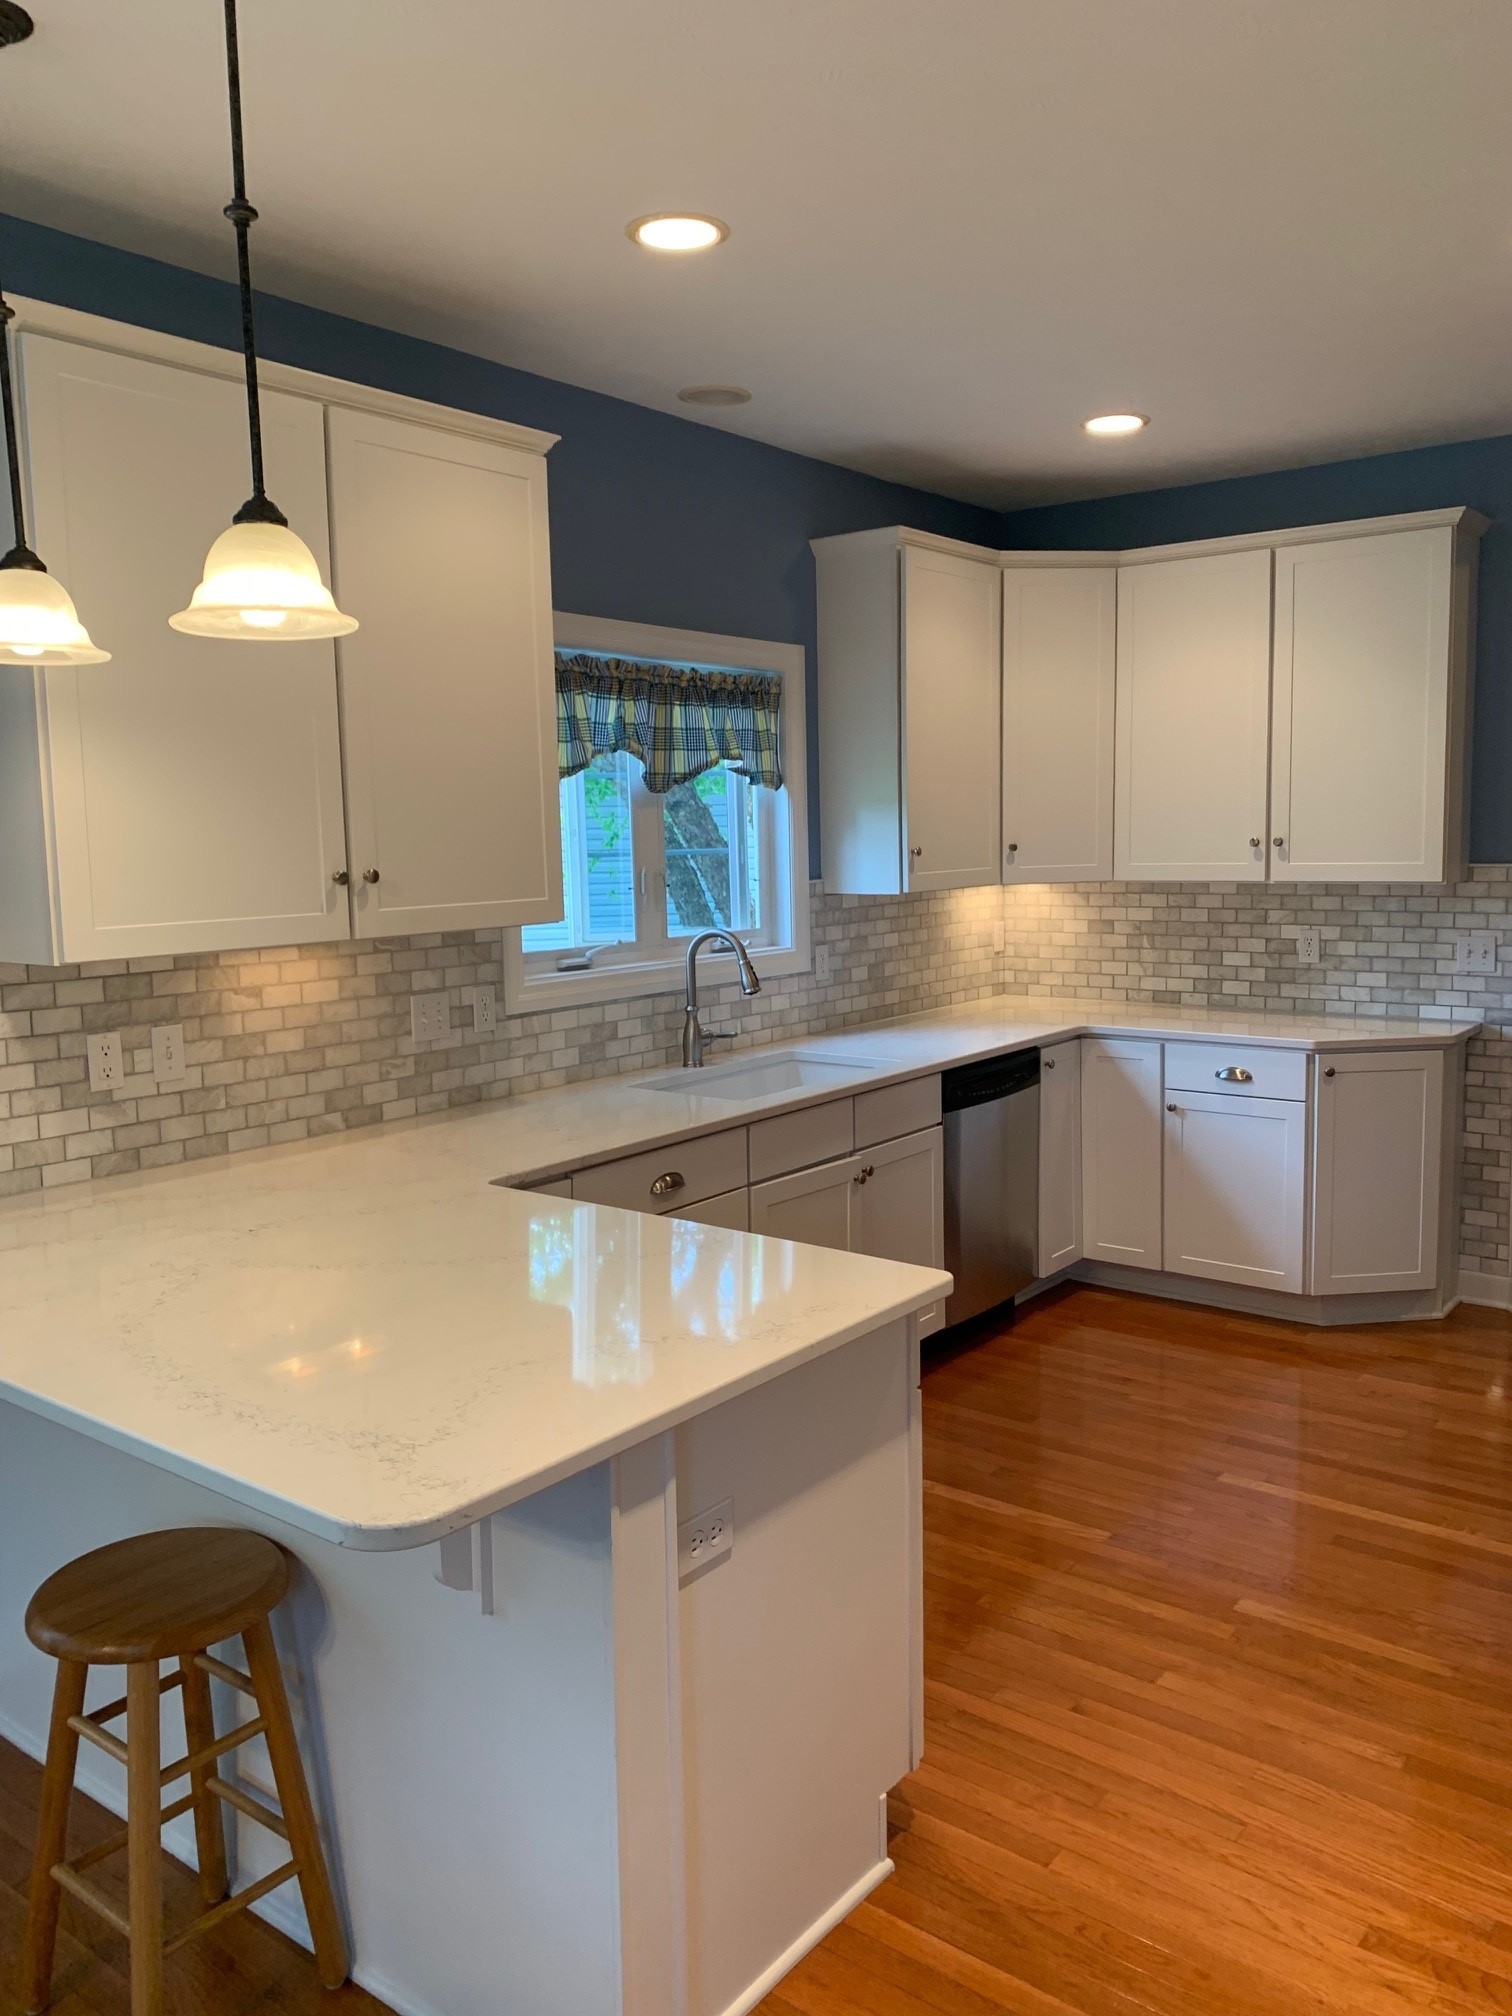 We remodel, redesign or build new! We feature American made Cambria countertops but we can build or remodel any necessary elements to make your kitchen exactly how you want it.